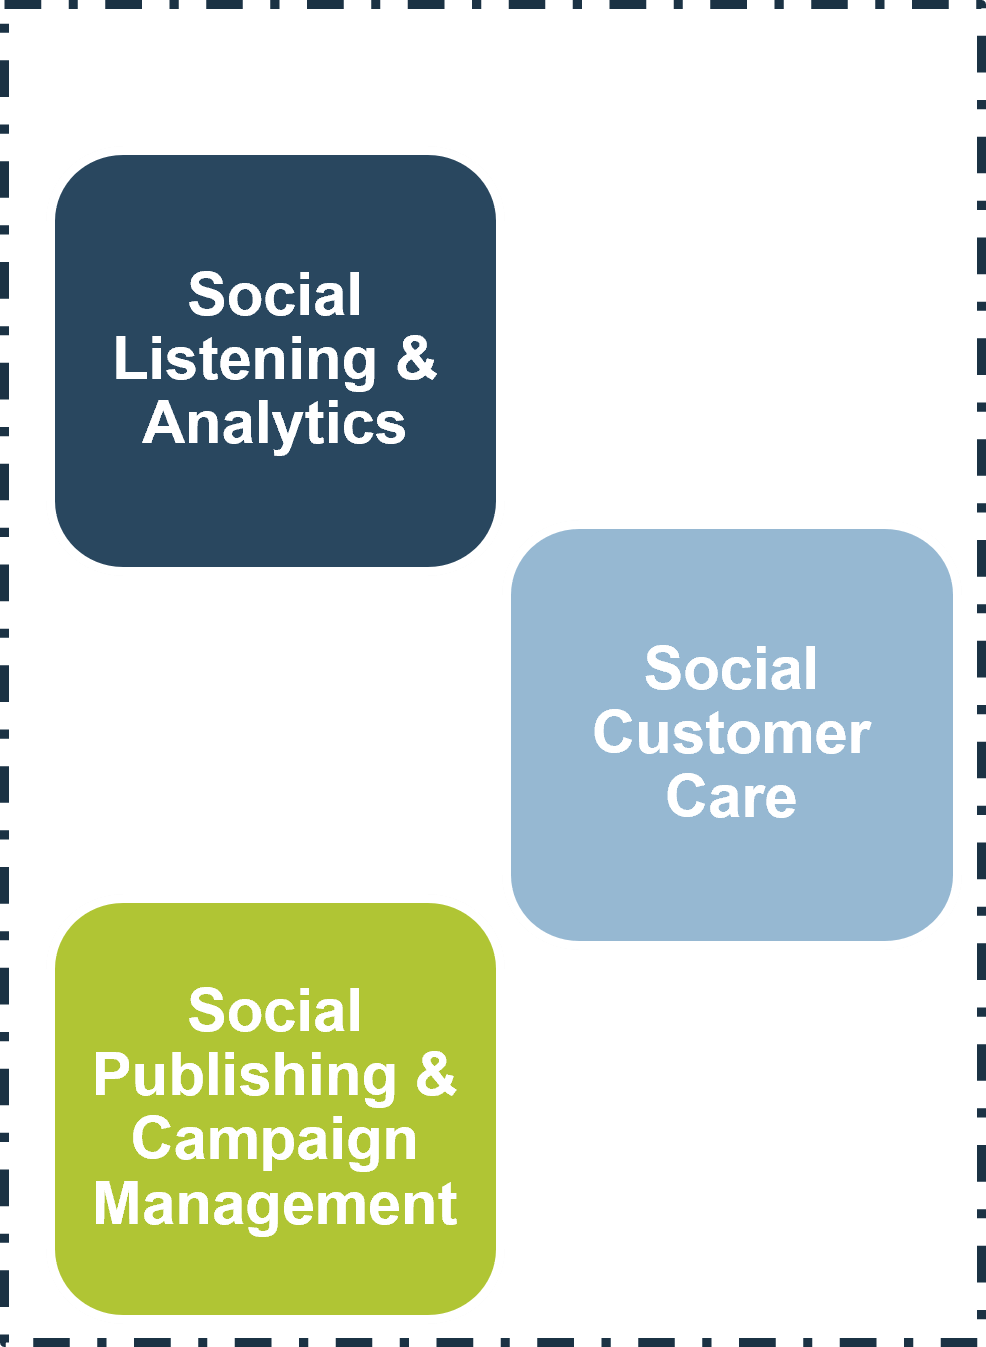 Three blocks labelled 'Social Listening & Analytics', 'Social Customer Care', and 'Social Publishing & Campaign Management'.